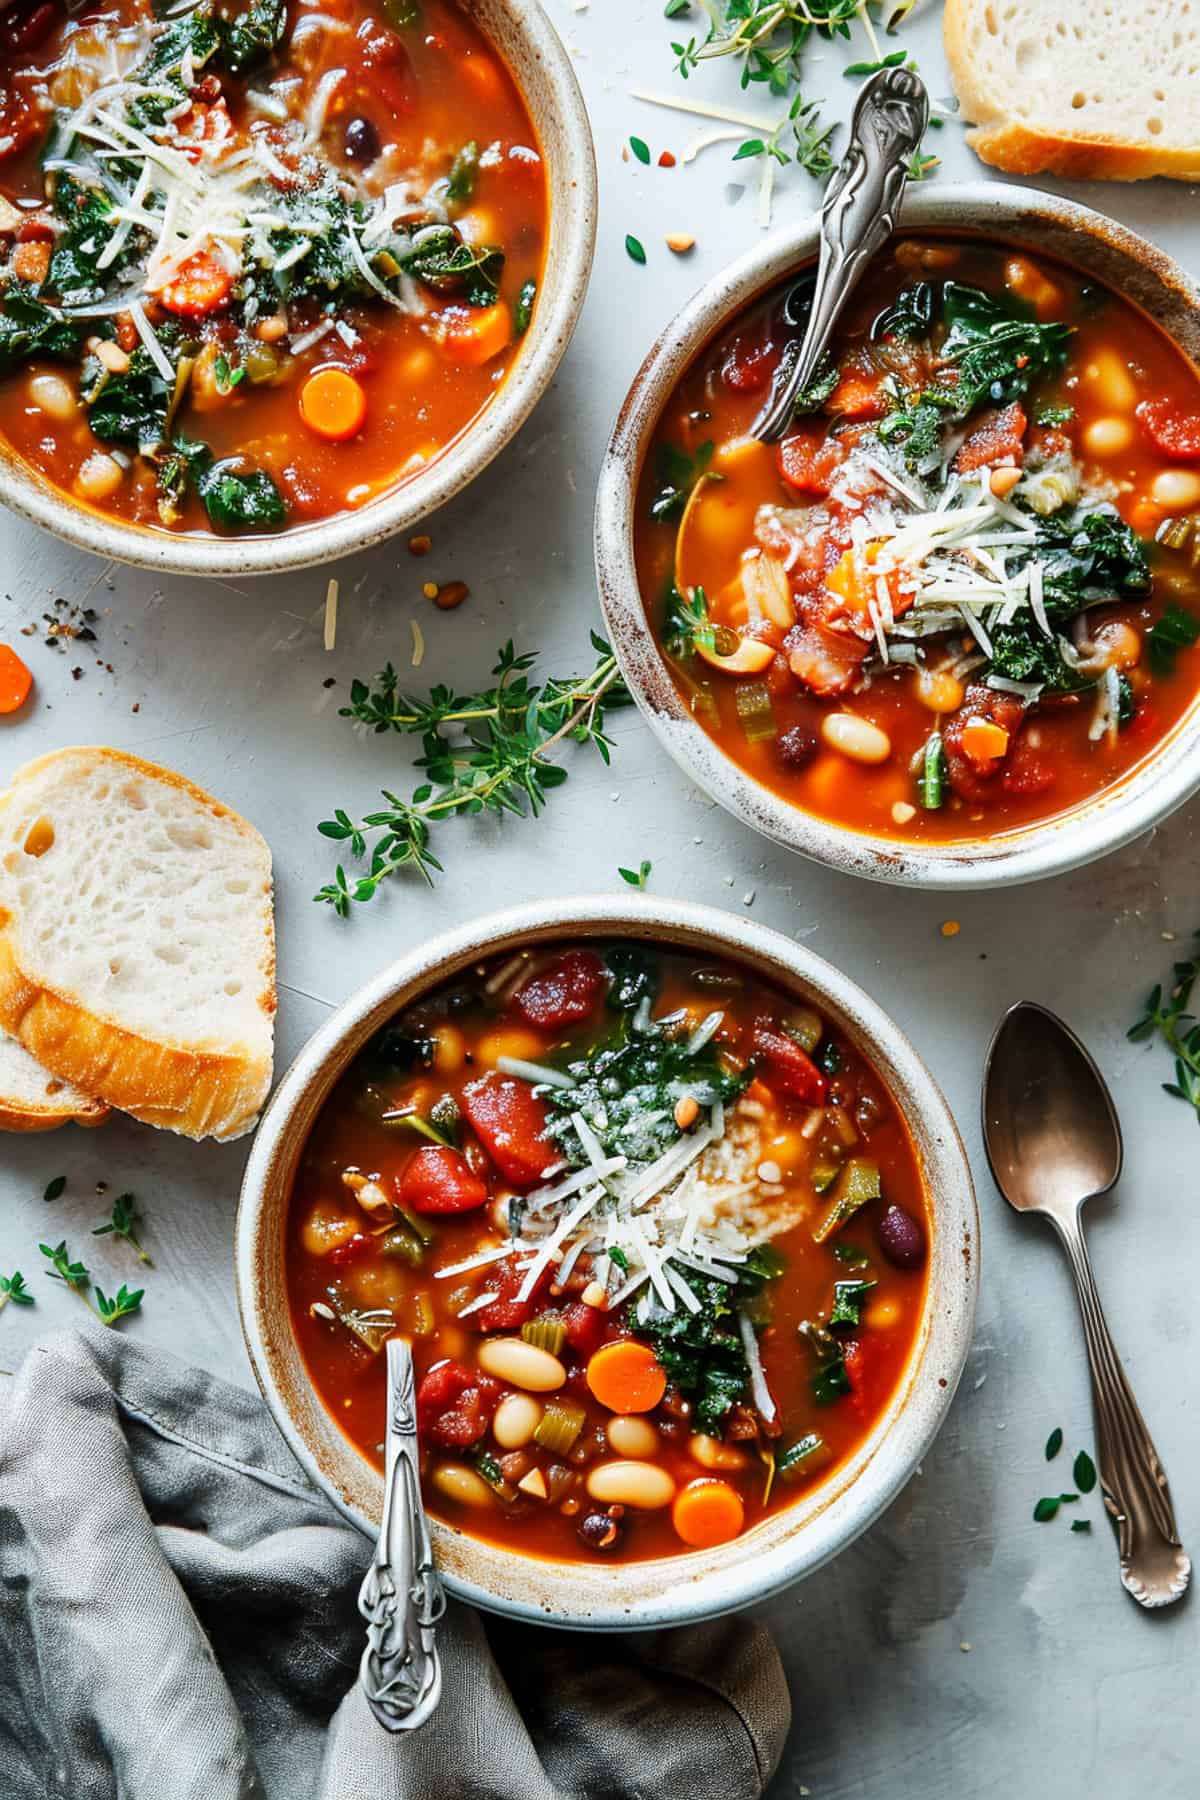 White bean minestrone in a bowl with bread and parmesan cheese.